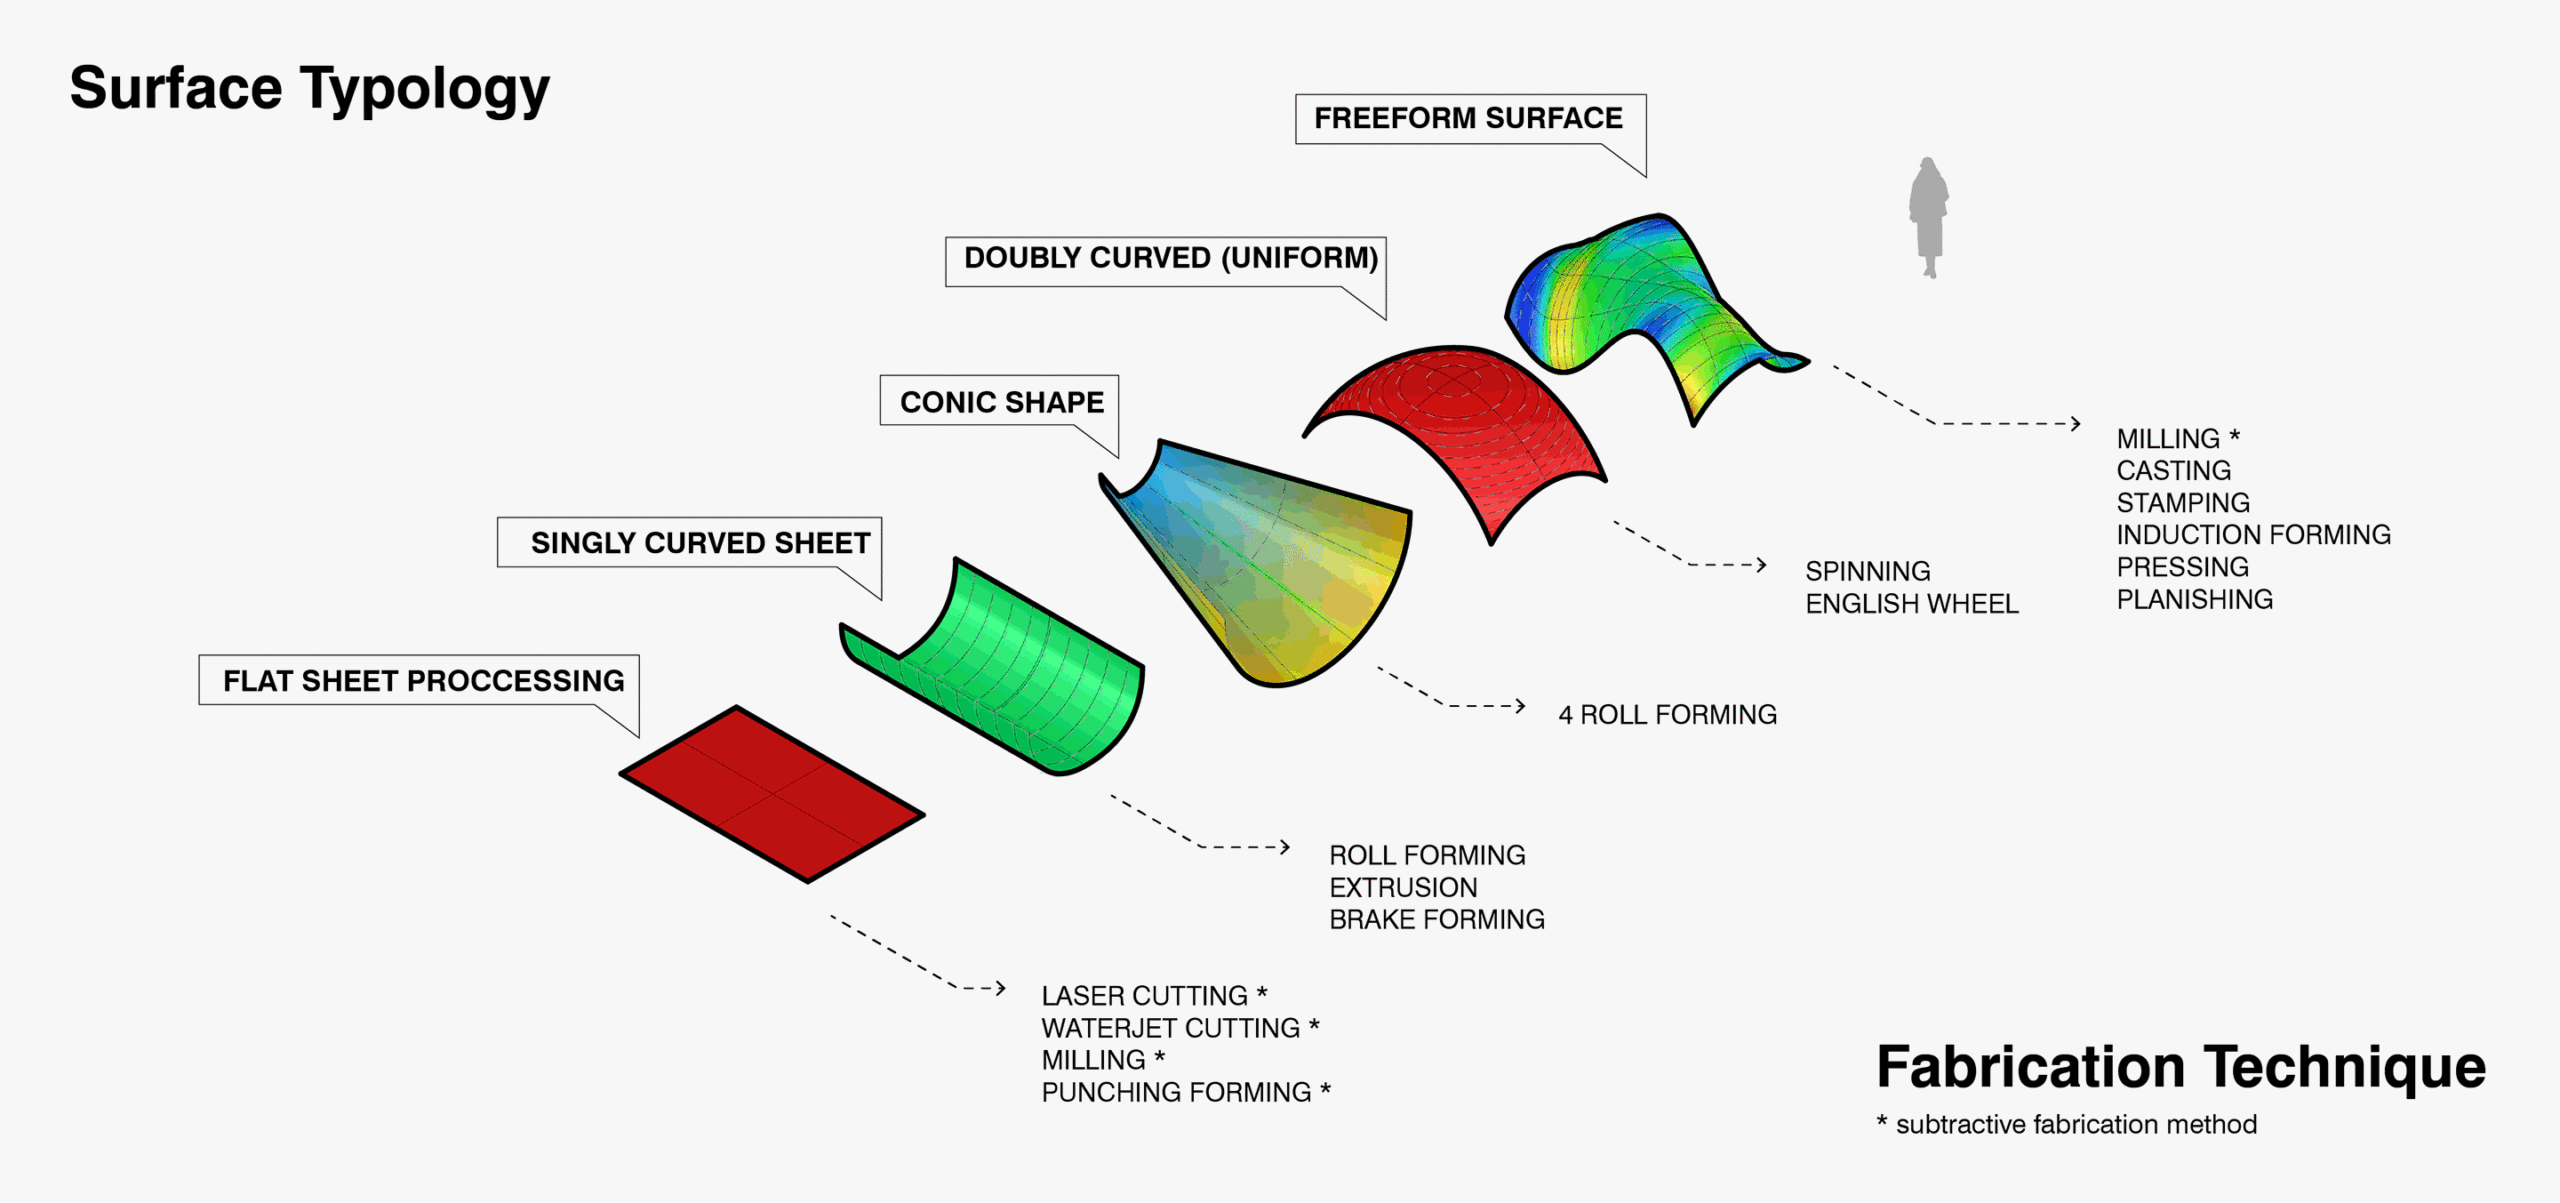 Types of surfaces and available fabrication processes.